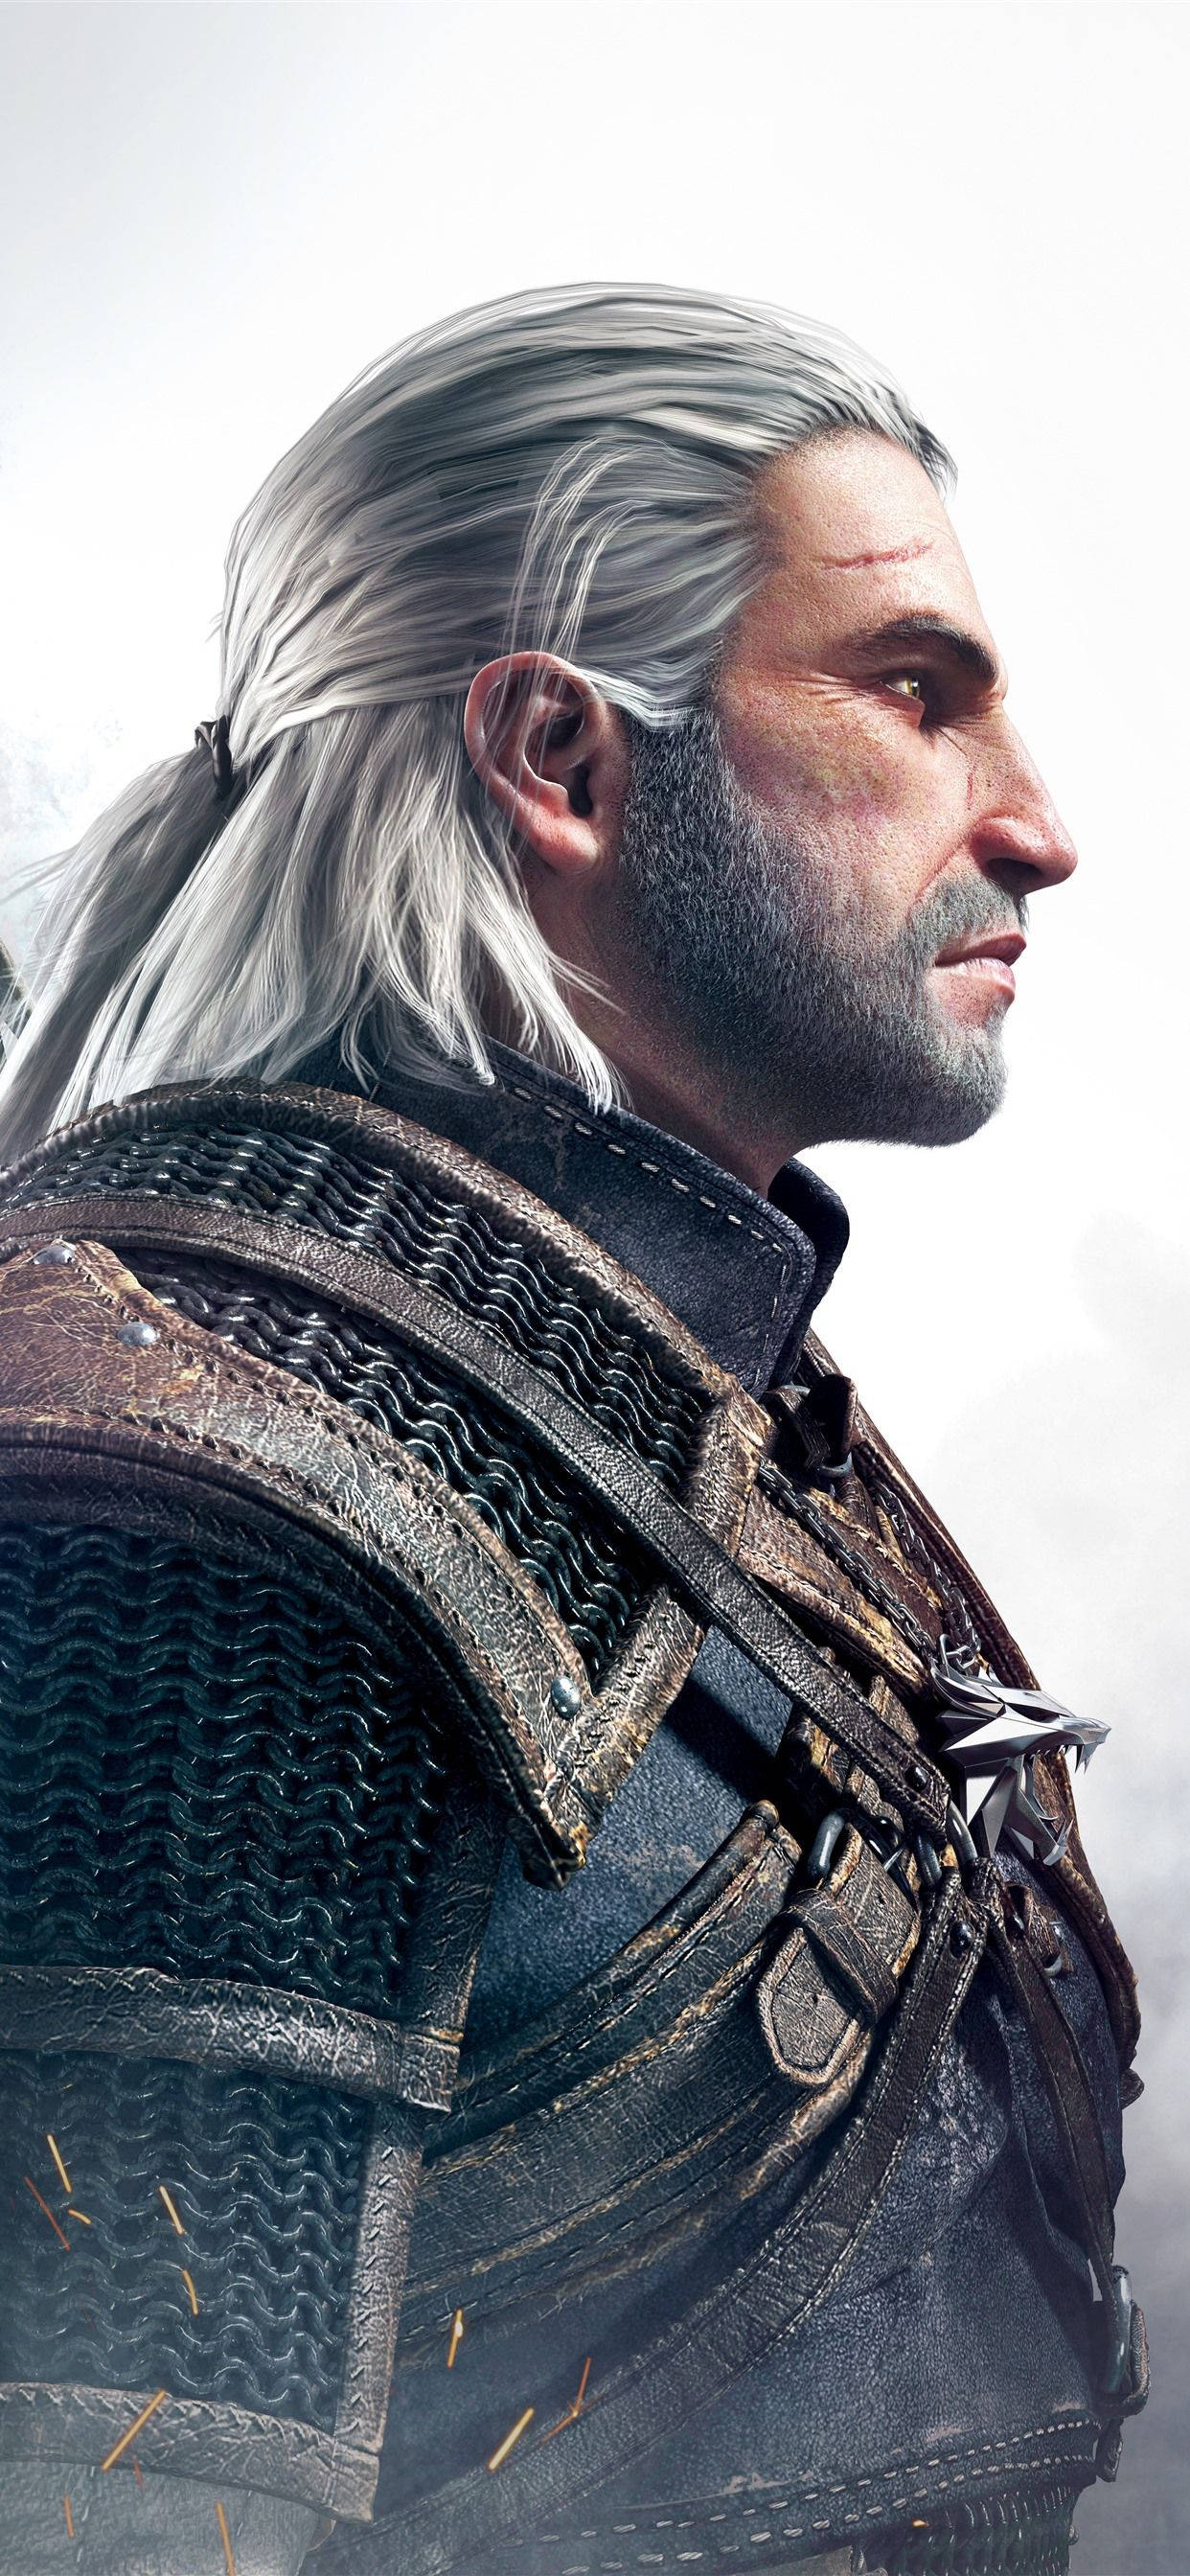 Geralt Side Profile Witcher 3 Iphone Wallpaper